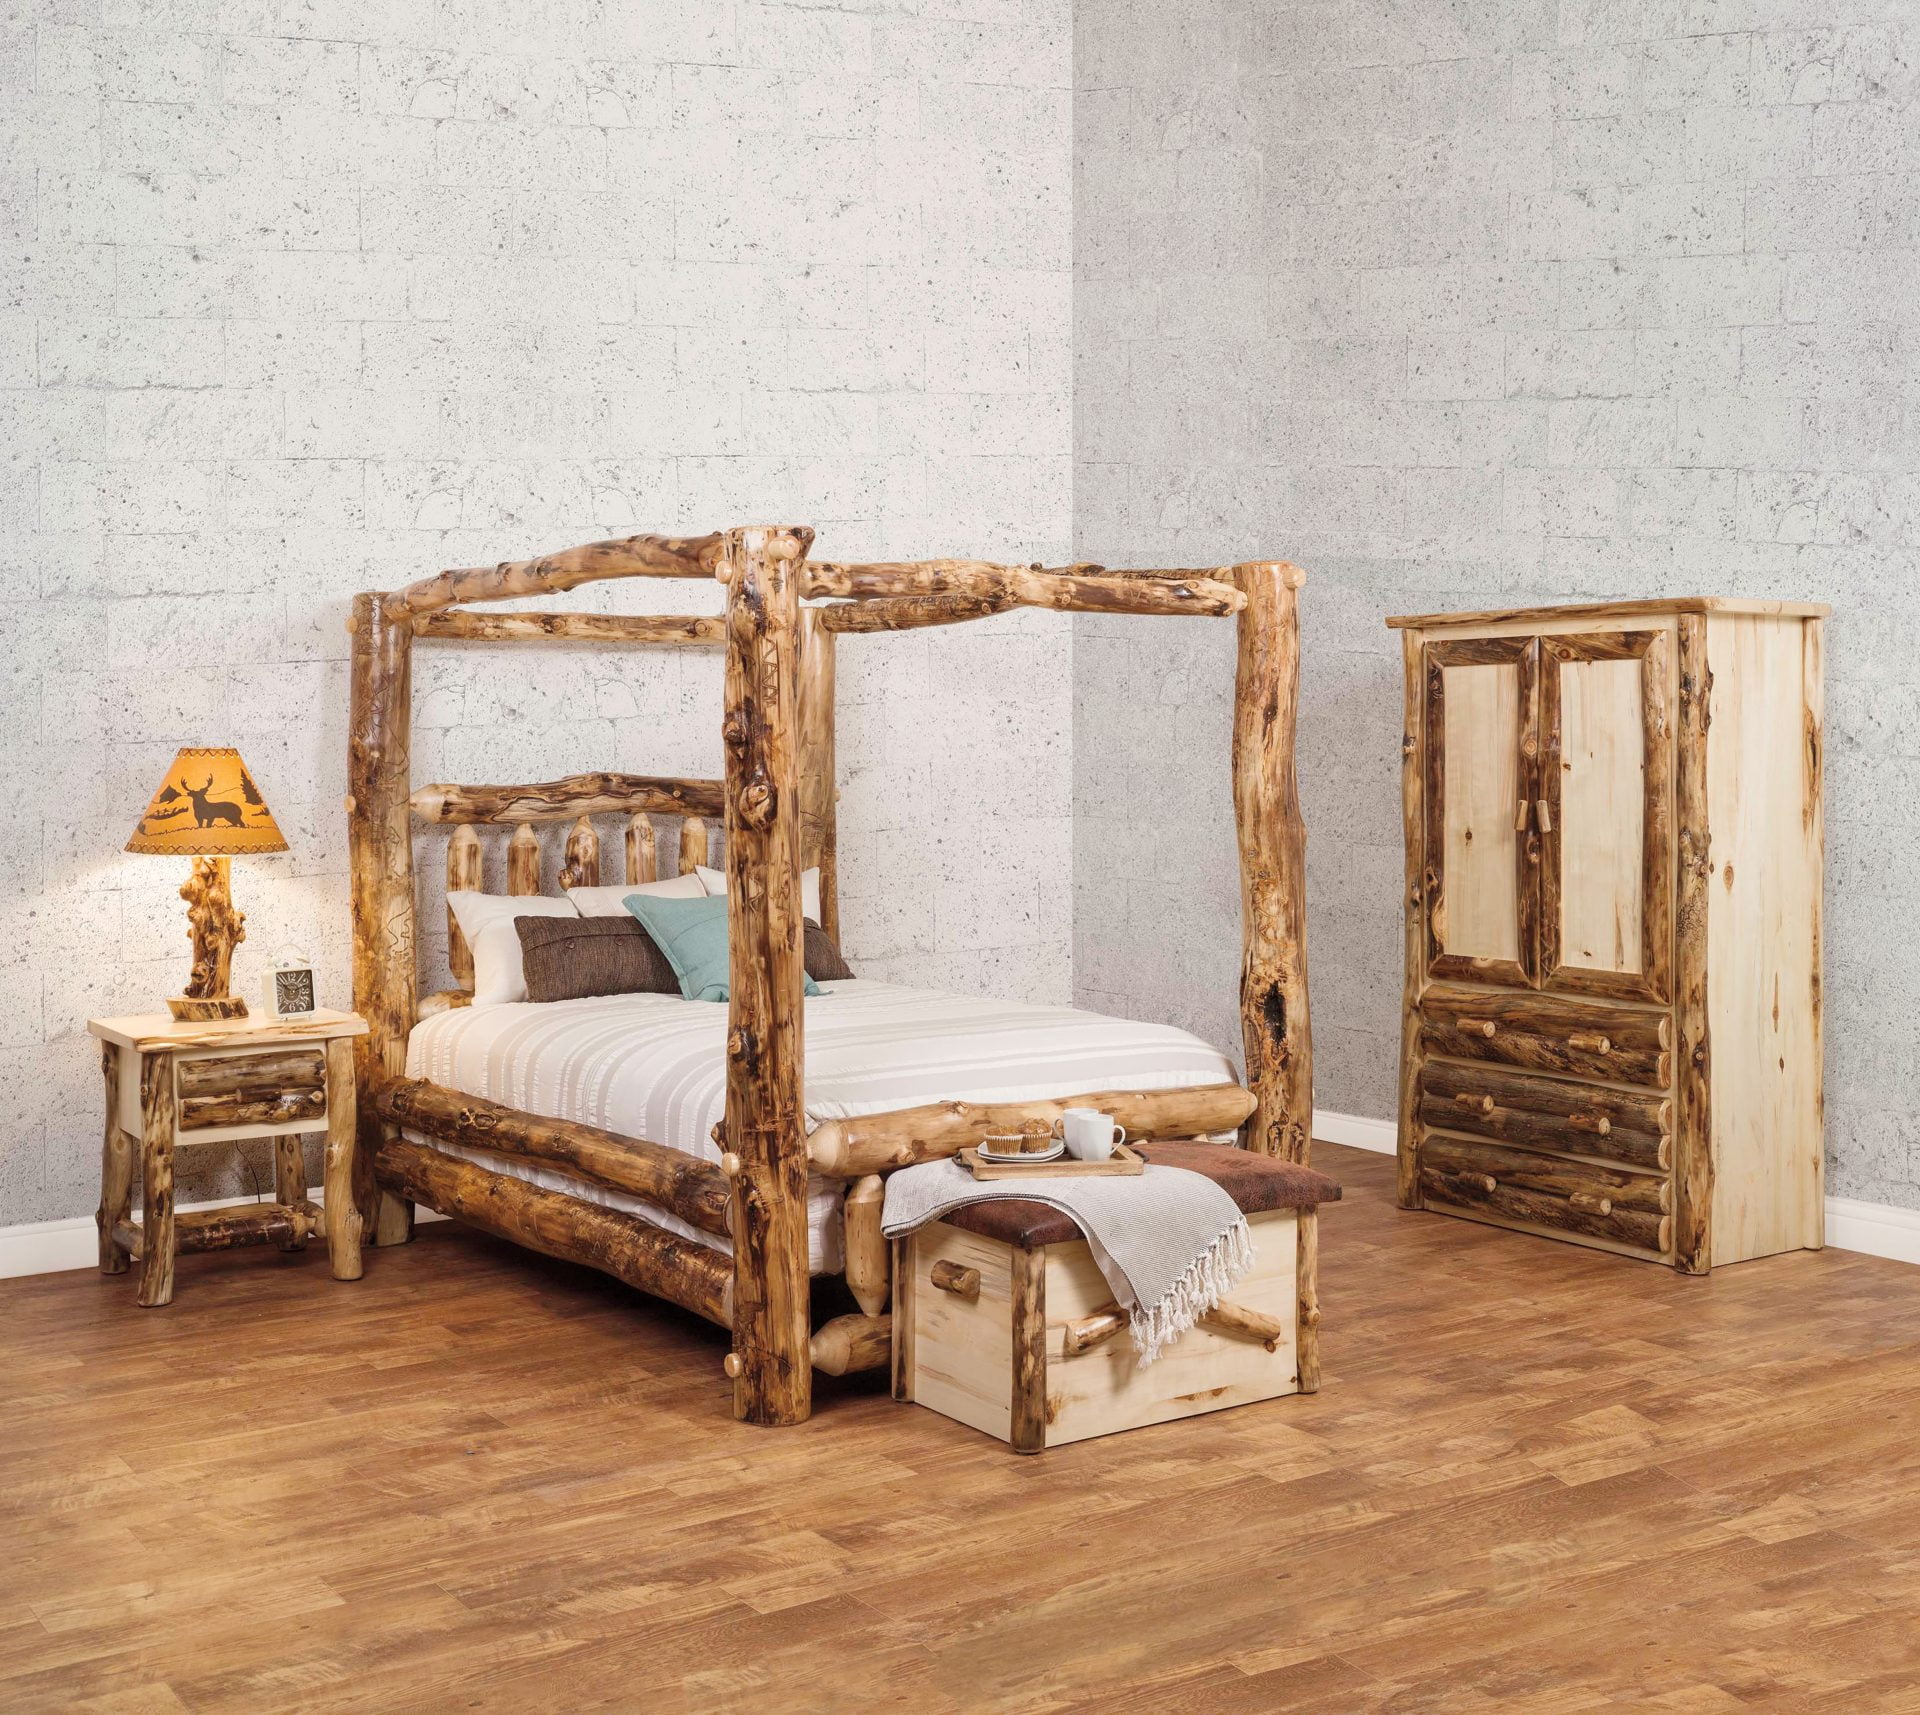 Rustic Aspen Log Complete Bedroom Set – Includes Bed, 1 Amoire, 1-Draver Nightstand, Blanket chest with seat, and 1 Table lamp